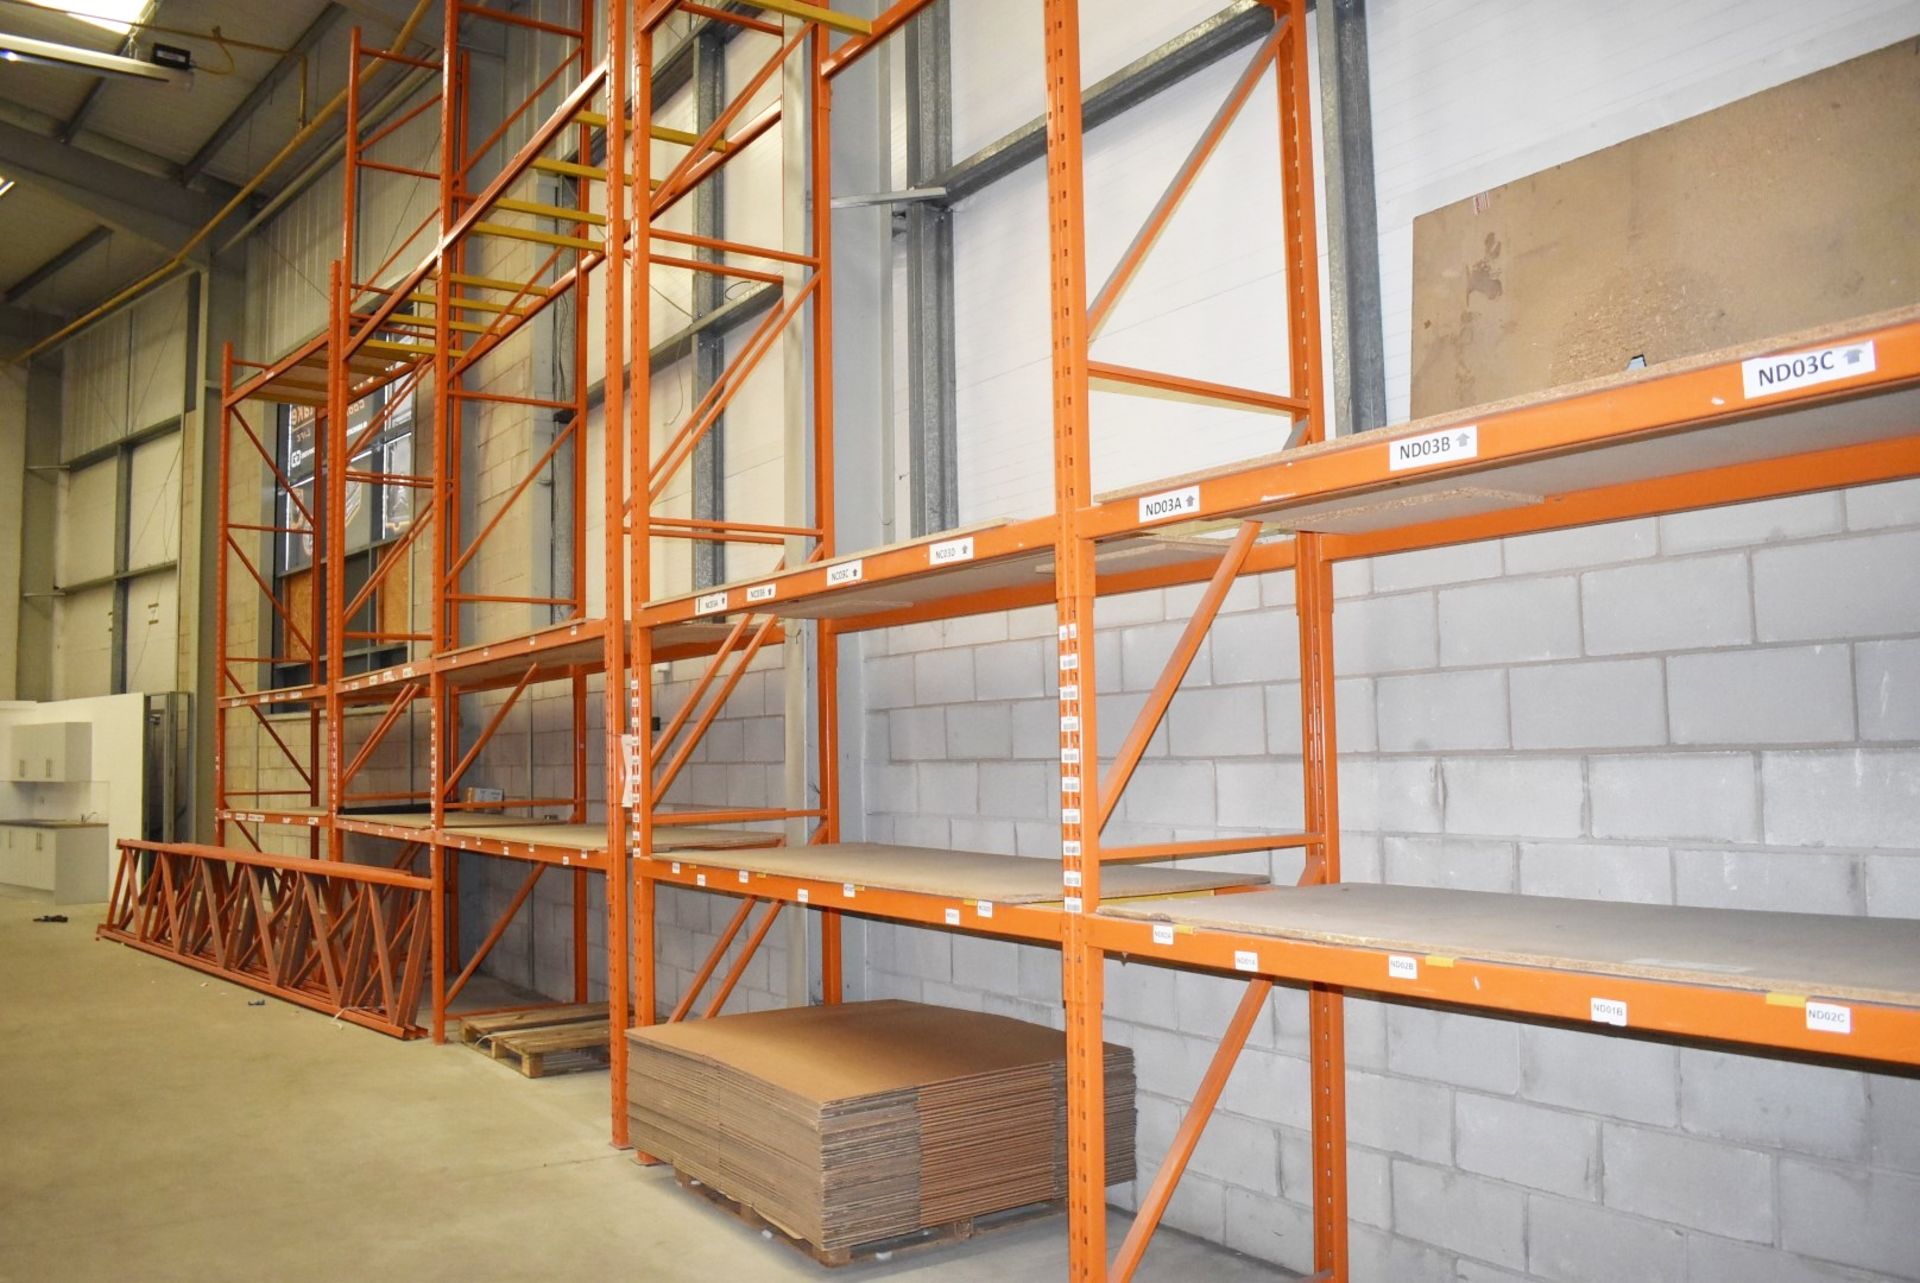 11 x Bays of RediRack Warehouse Pallet Racking - Lot Includes 10 x Uprights and 30 x Crossbeams - - Image 3 of 4